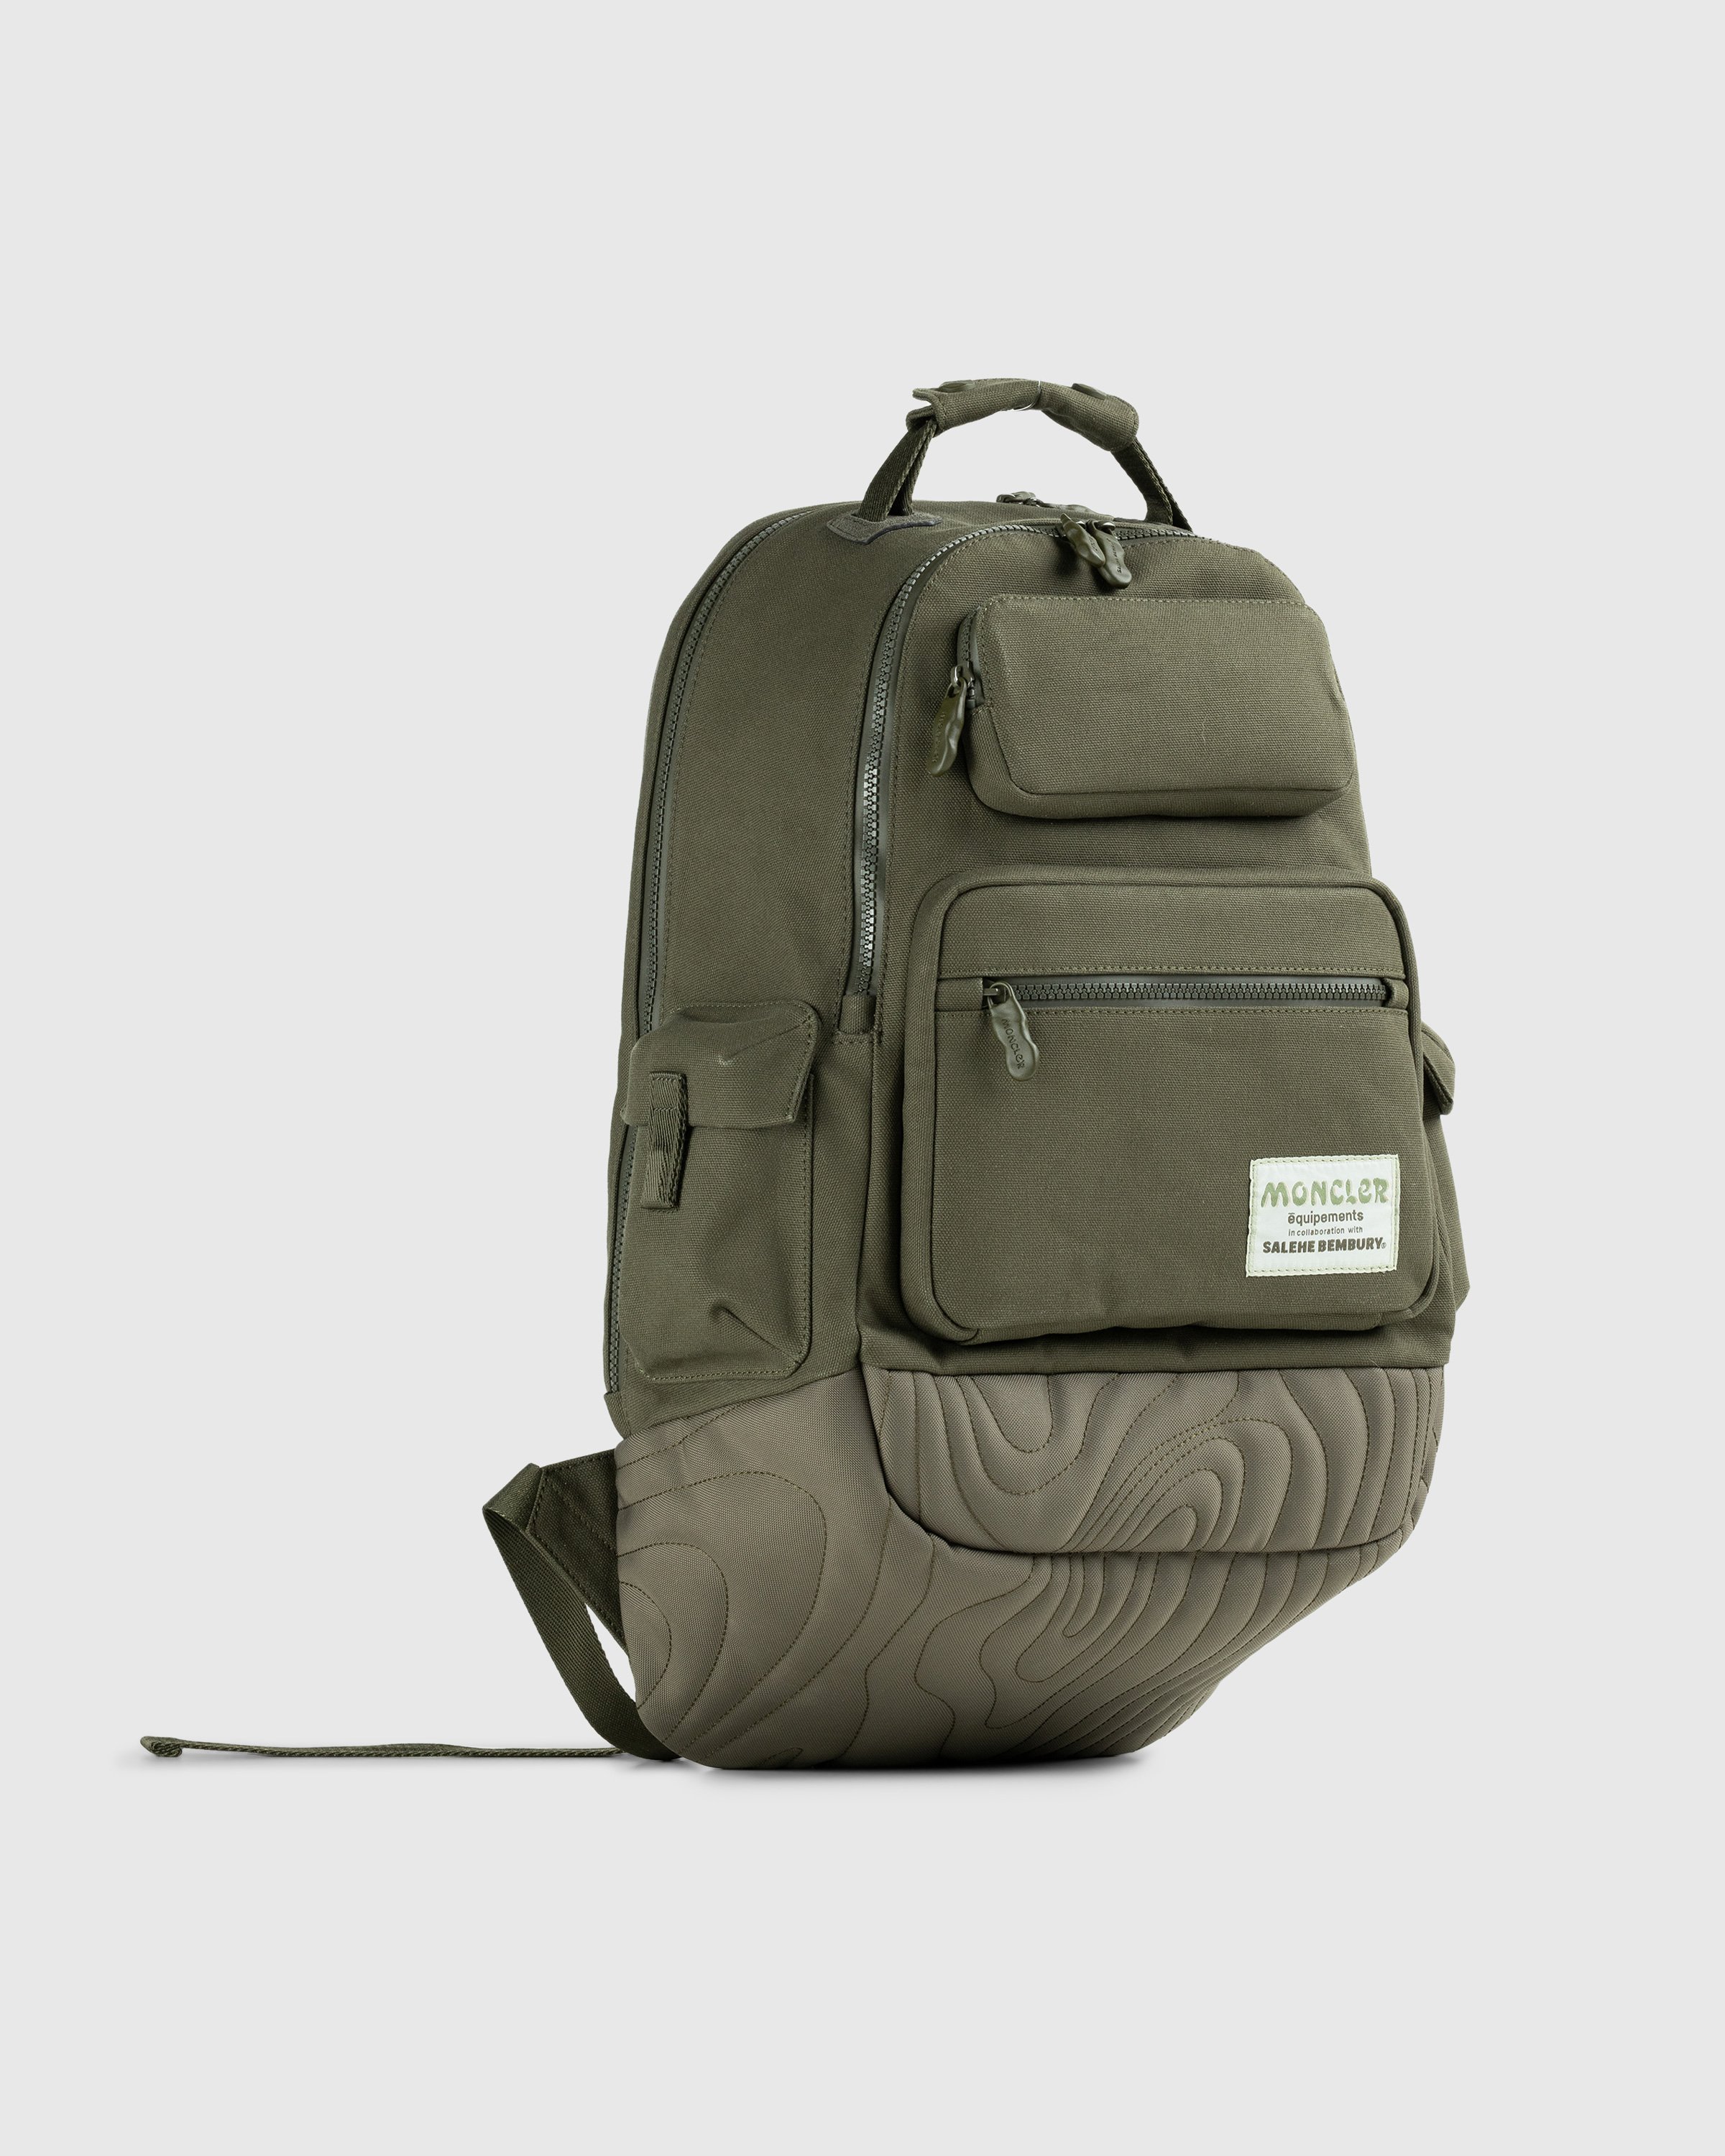 Moncler x Salehe Bembury - Canvas Backpack Green - Accessories - Green - Image 3